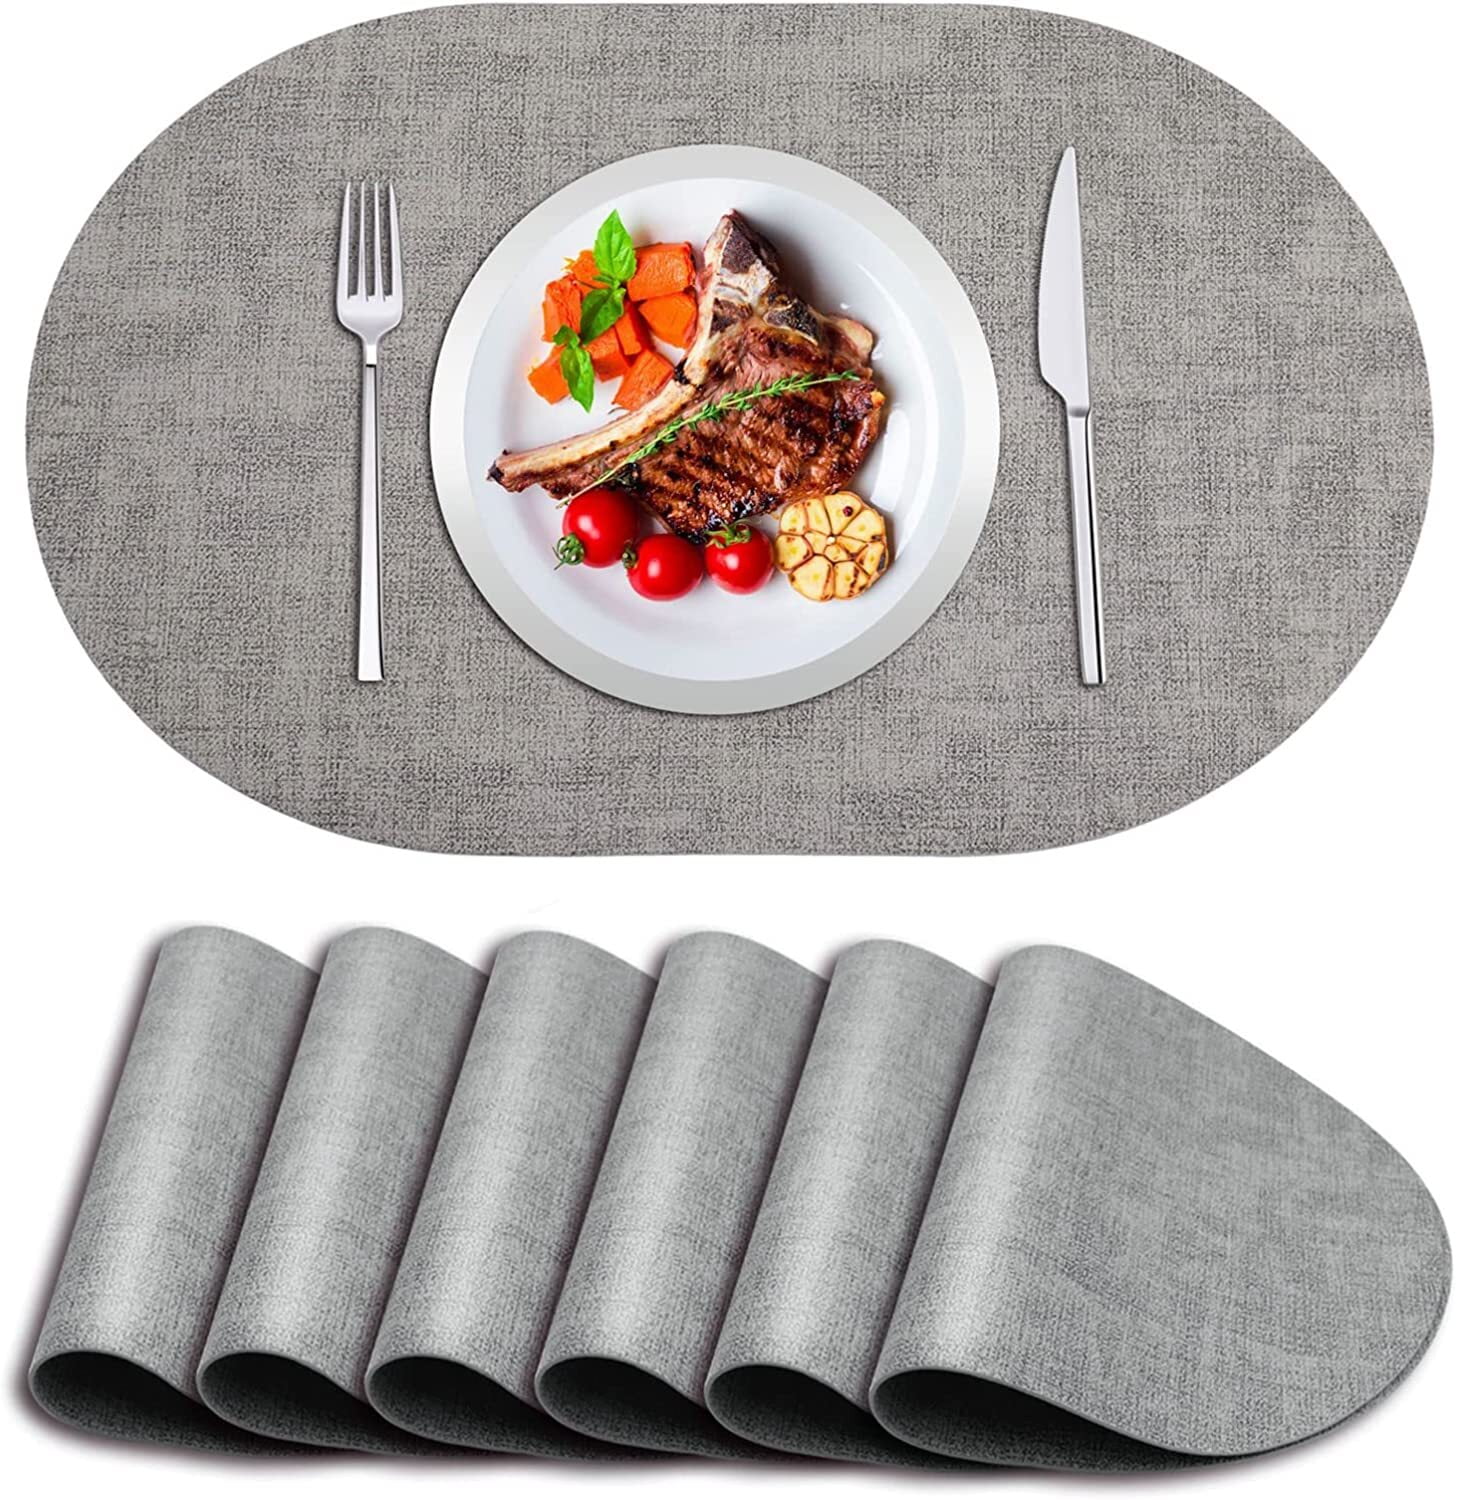 Set of 6 Light Blue Leather Placemats - Heat Resistant, Easy to Clean,  Waterproof for Kitchen Dining